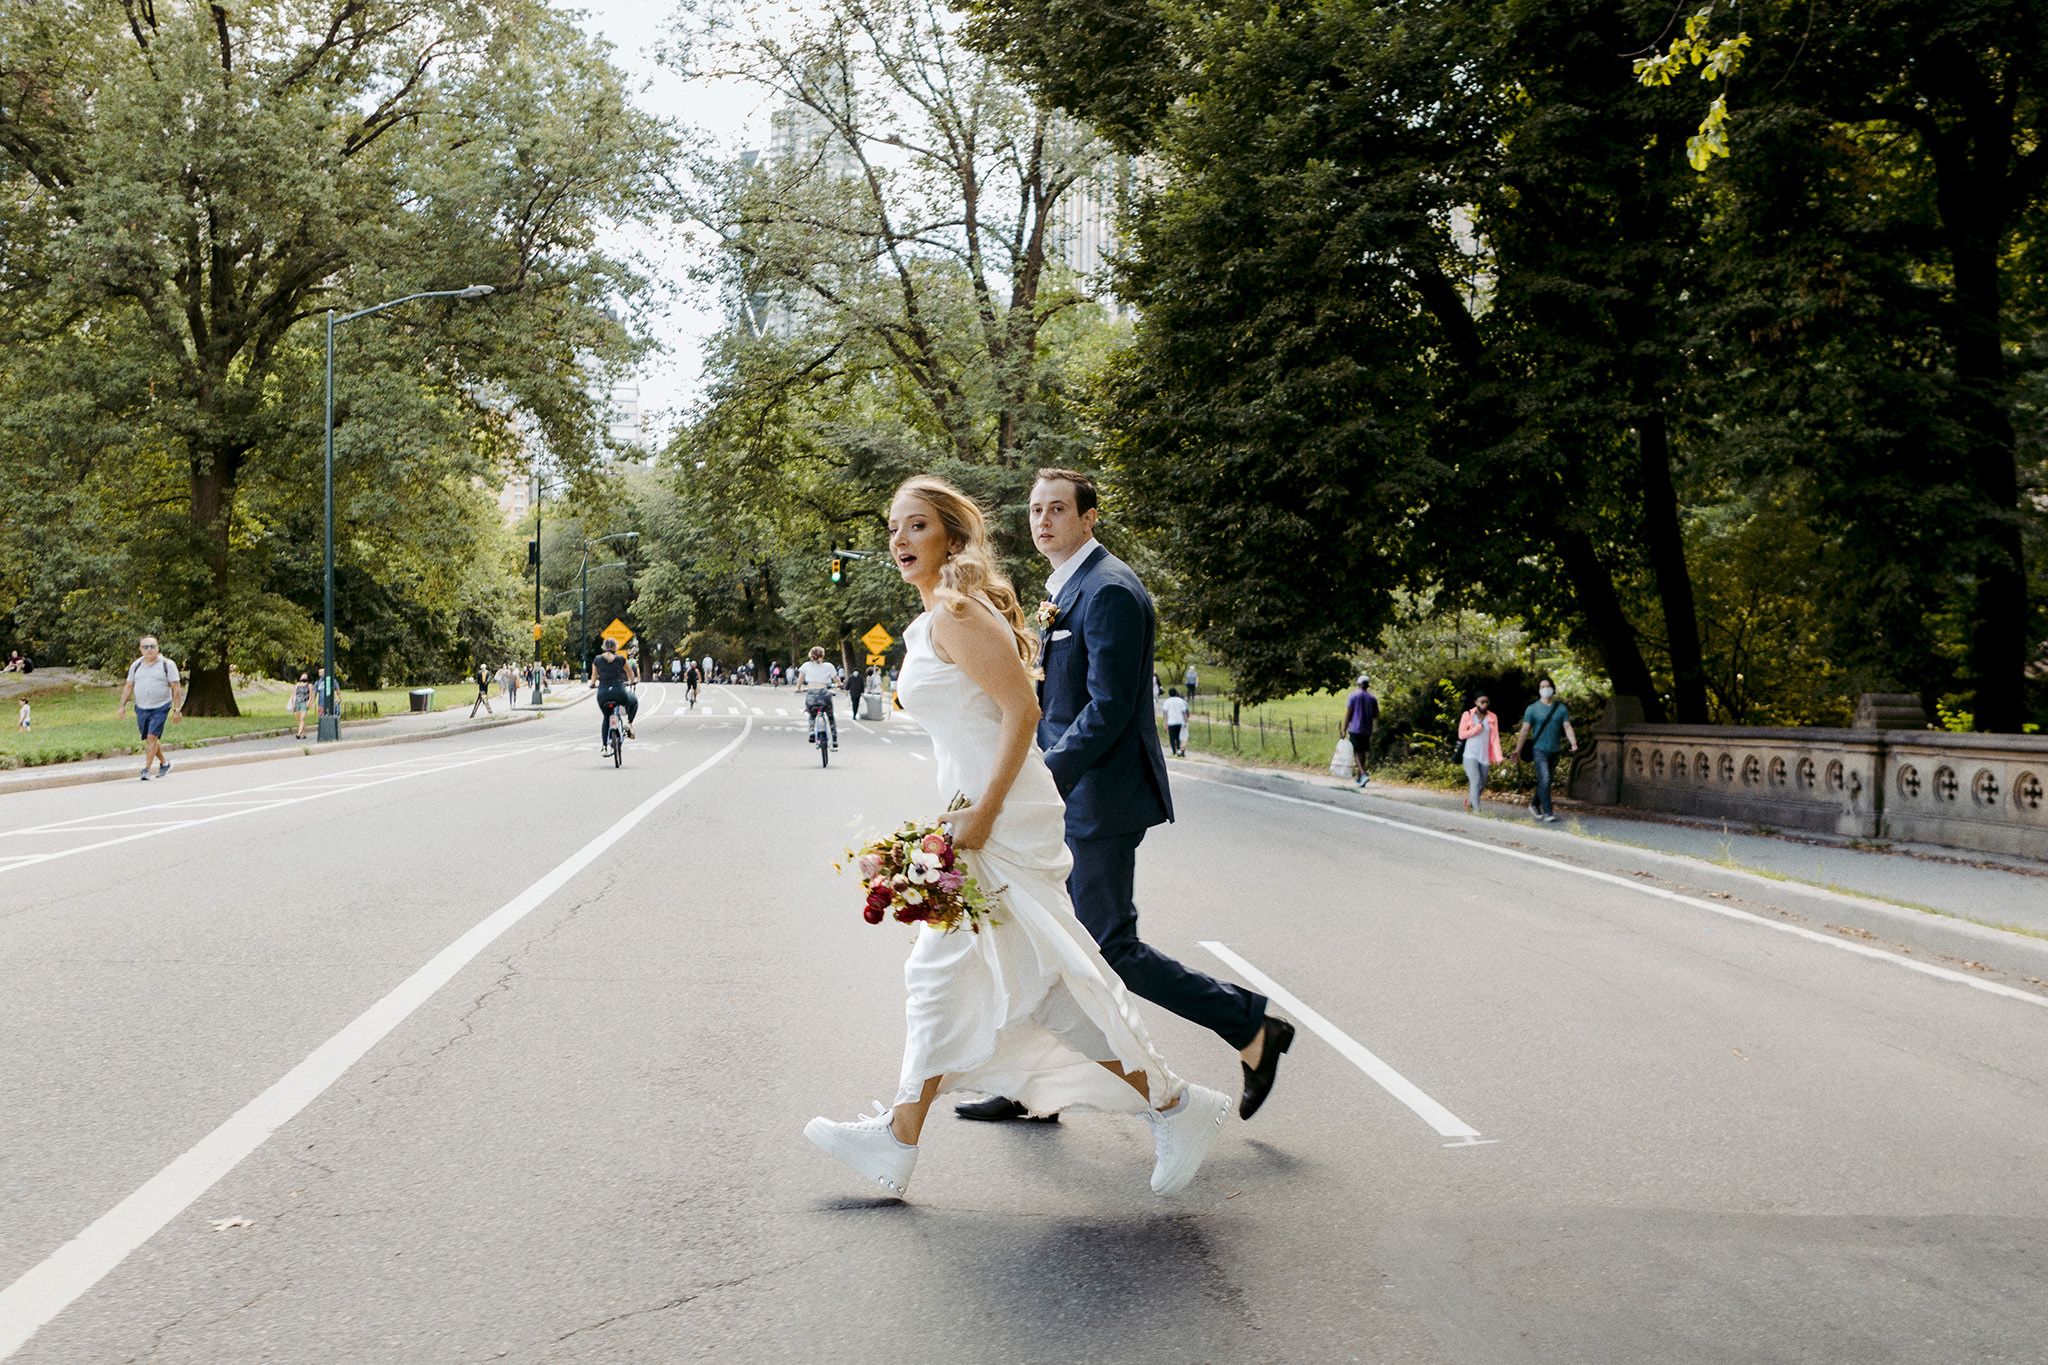 The bride and groom are crossing the street of New York City.